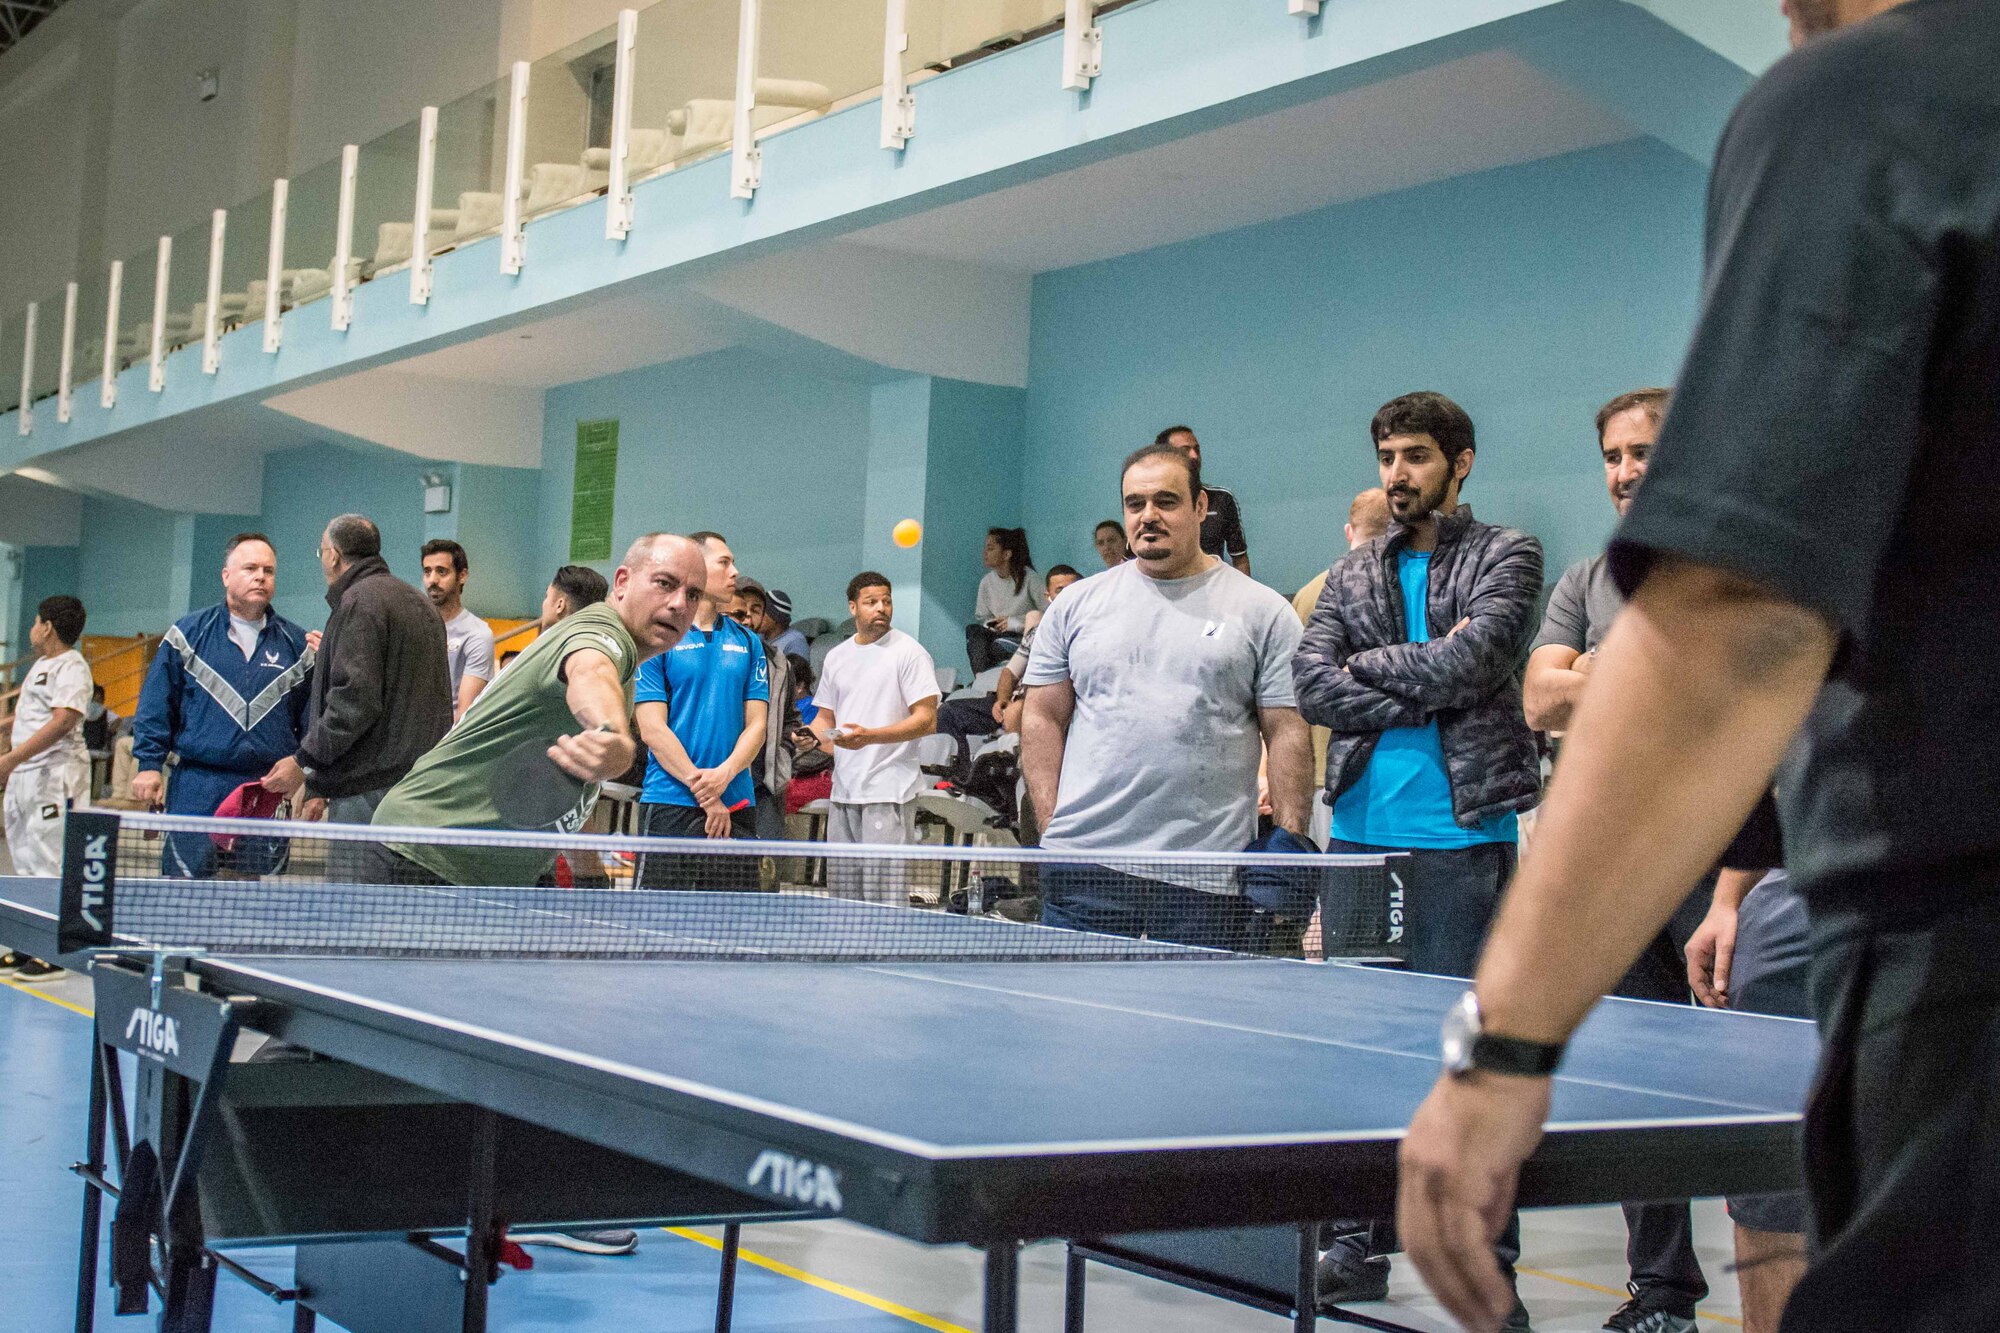 Coalition partners compete at Qatar National Sports Day event